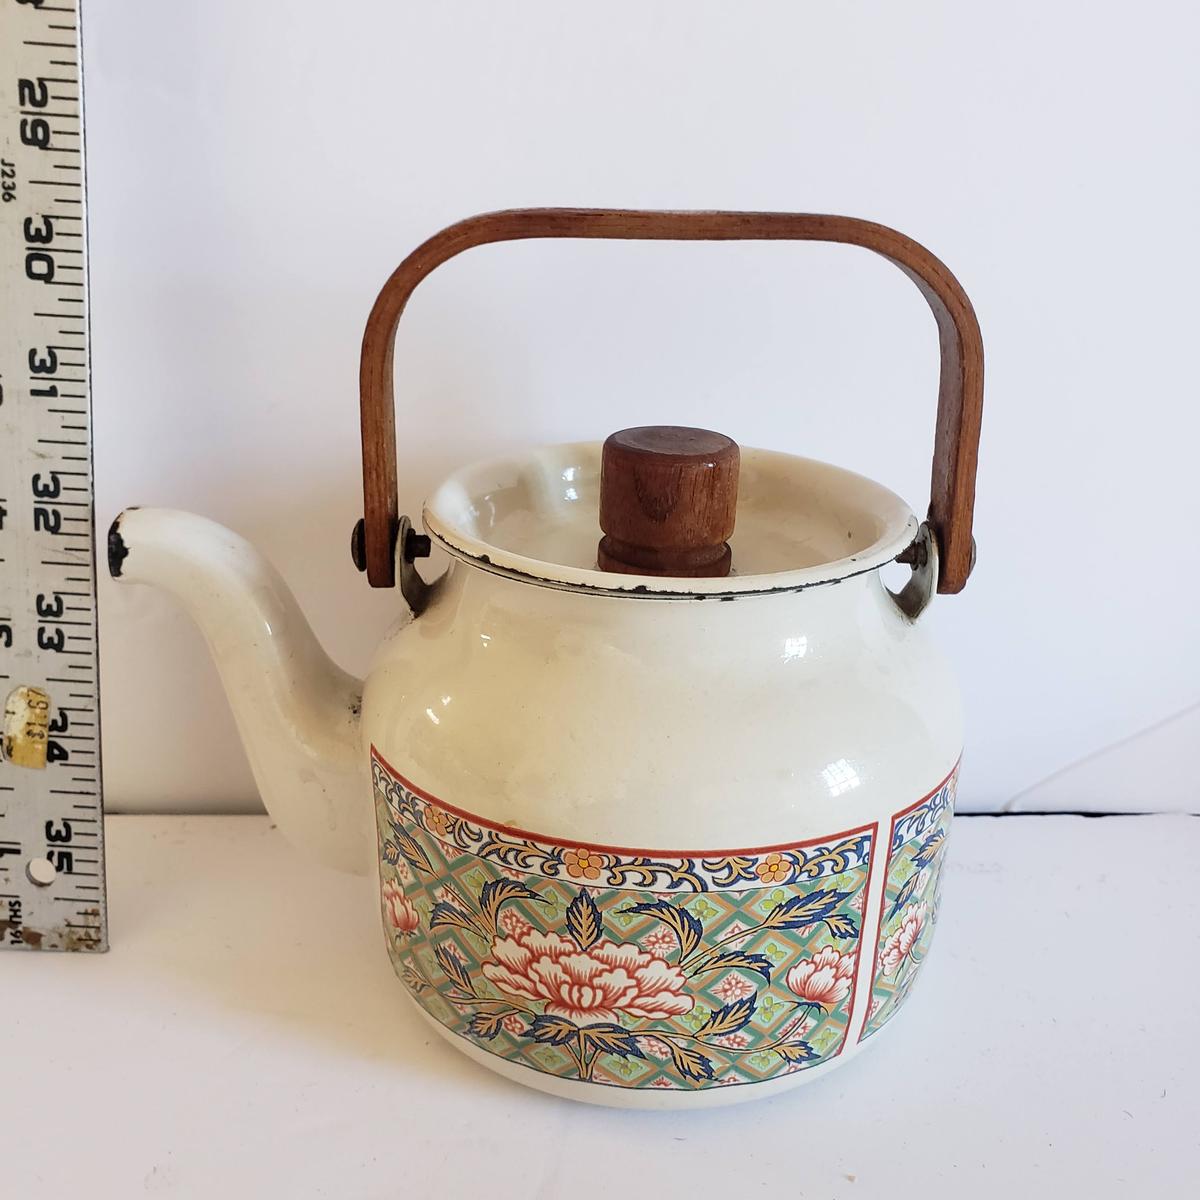 Enamelware Teapot, Floral Design with Wood Handle